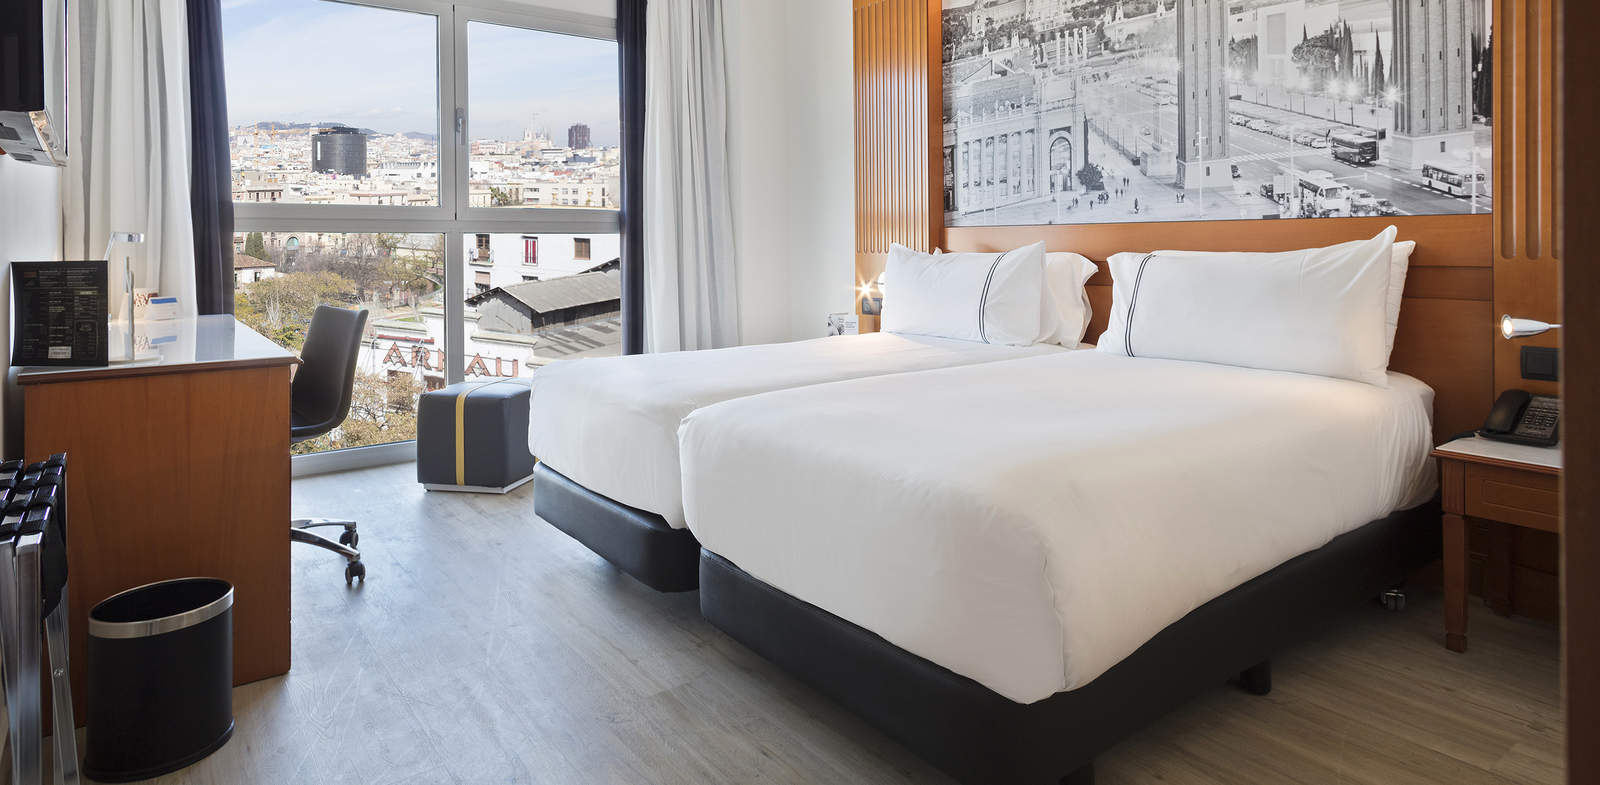 101aHotelBarcelonaApolo_Affiliated-Standard-Room-Twin_D-1.jpg